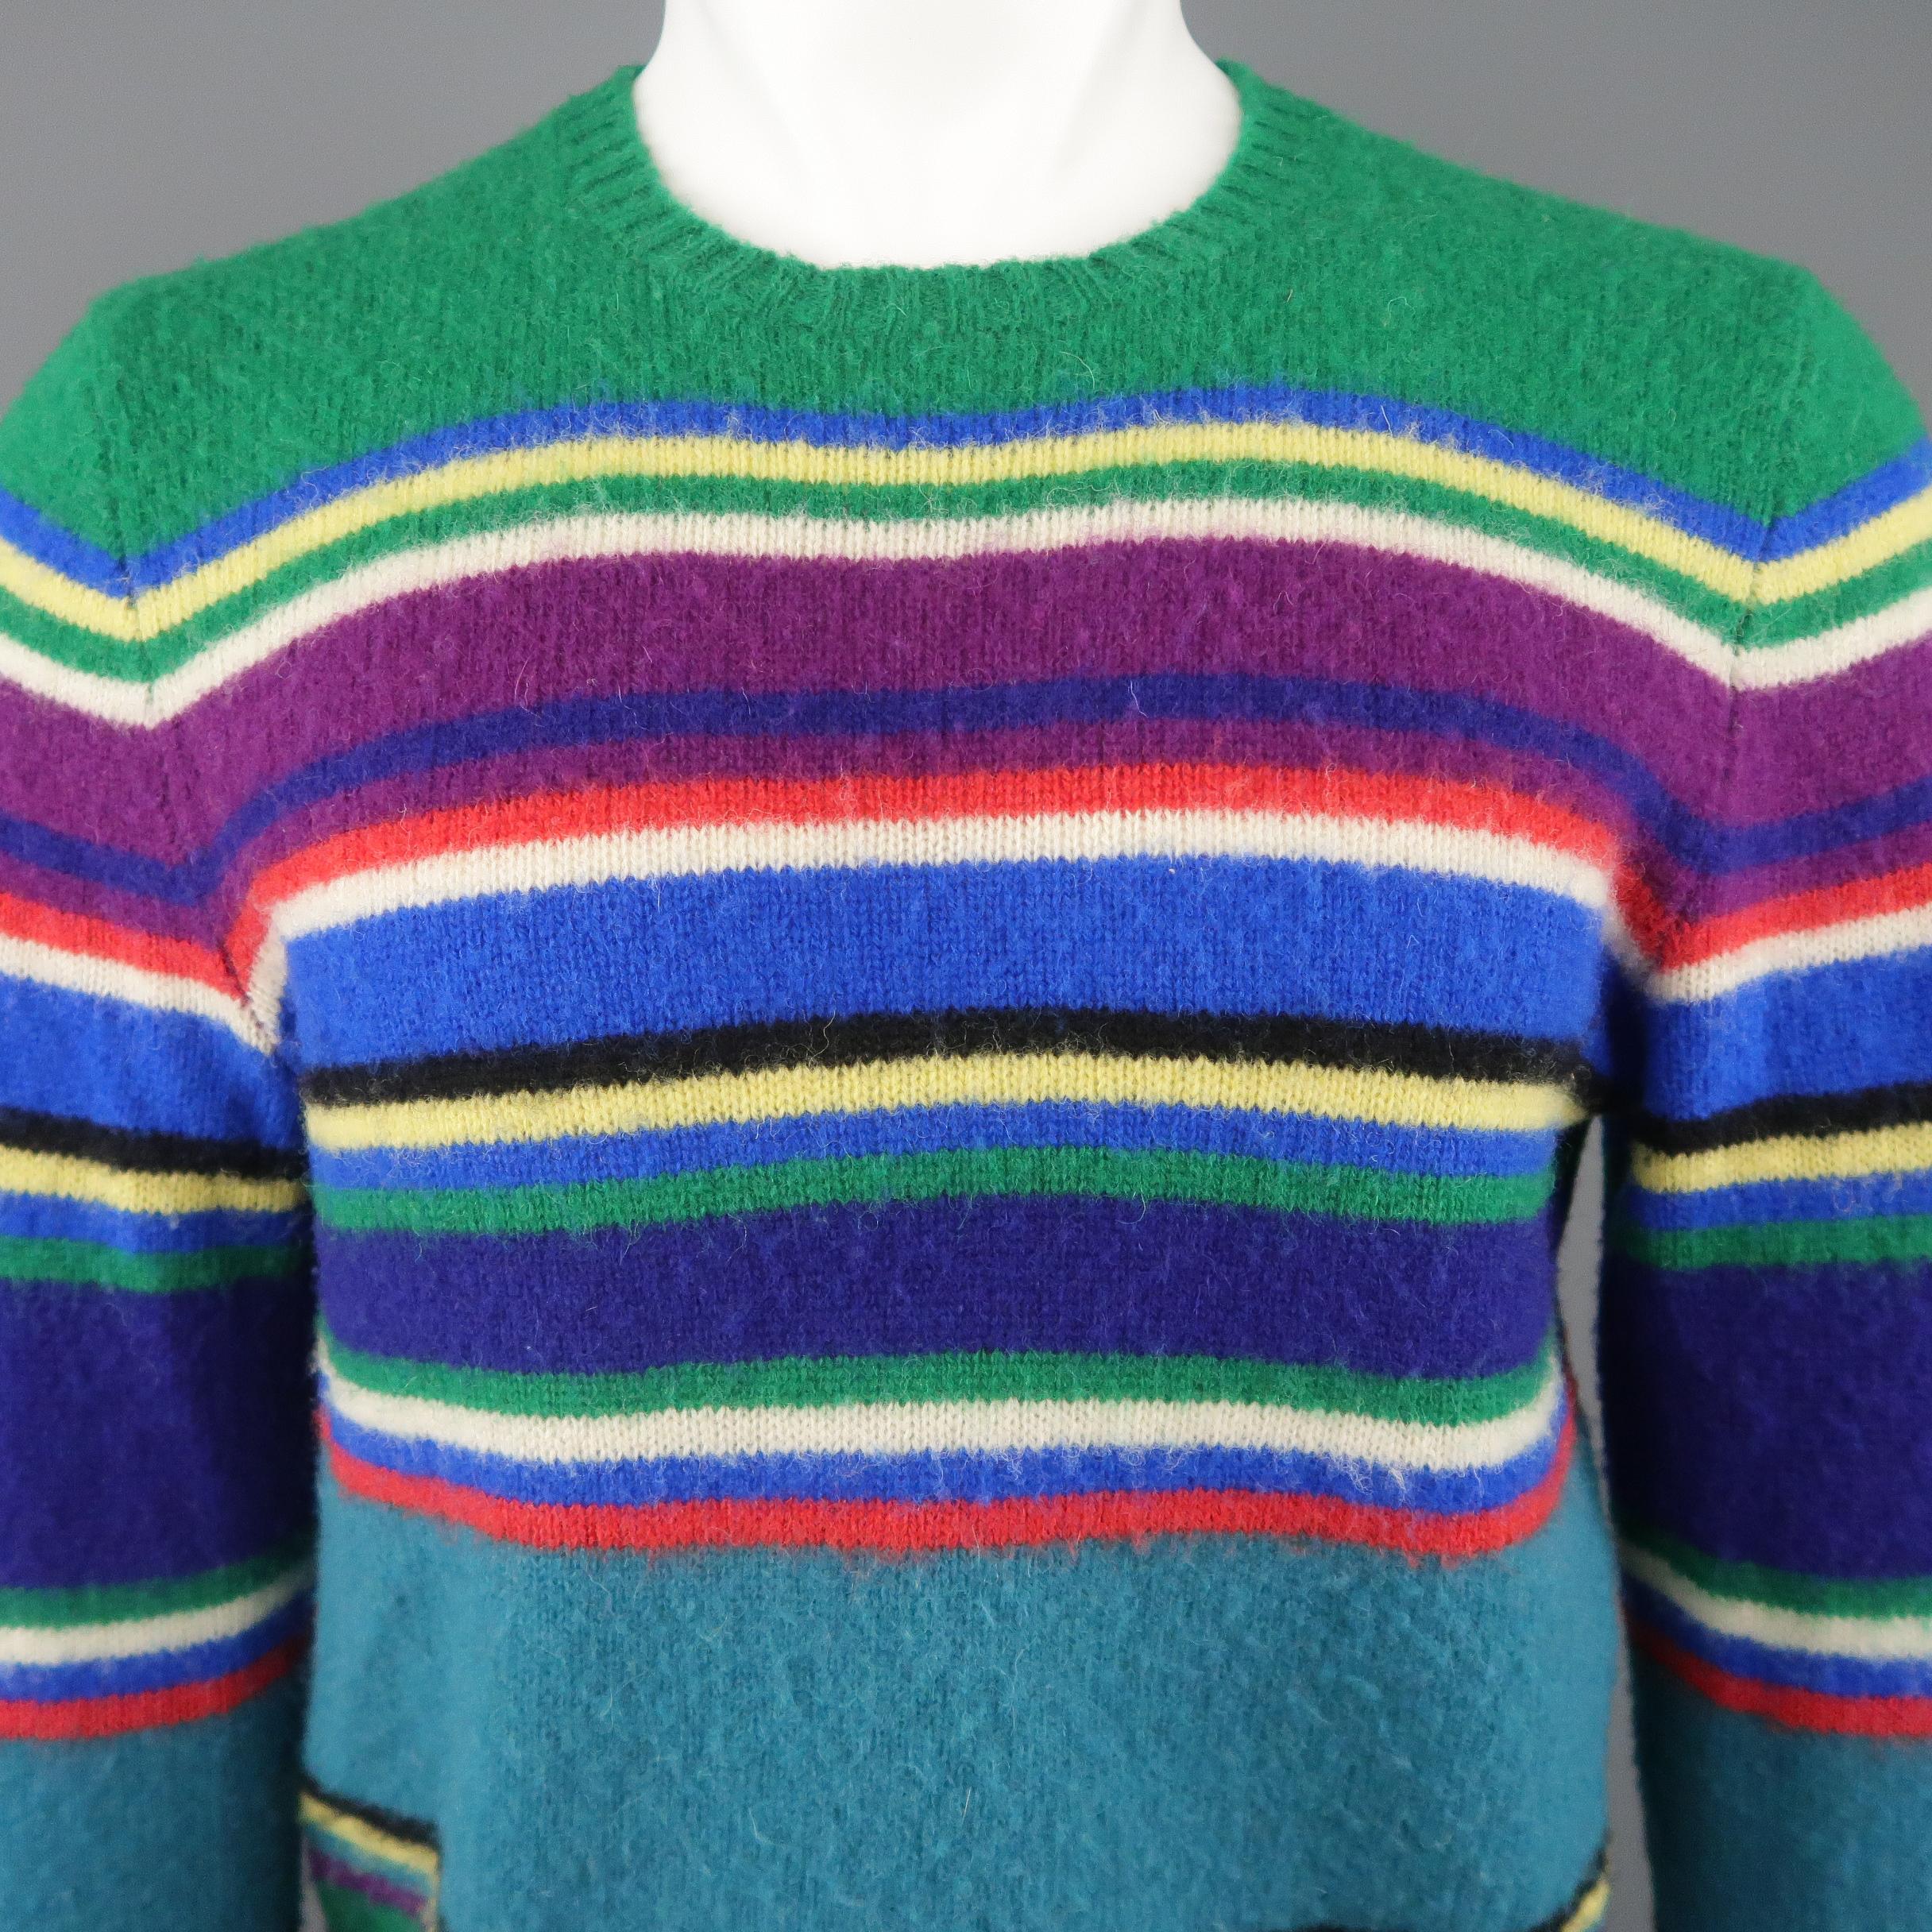 POLO RALPH LAUREN pullover sweater comes in teal and green wool knit with all over multi-color stripe pattern and ribbed crewneck and cuffs.
 
Very Good Pre-Owned Condition.
Marked: M
 
Measurements:
 
Shoulder: 17 in.
Chest: 42 in.
Sleeve: 29